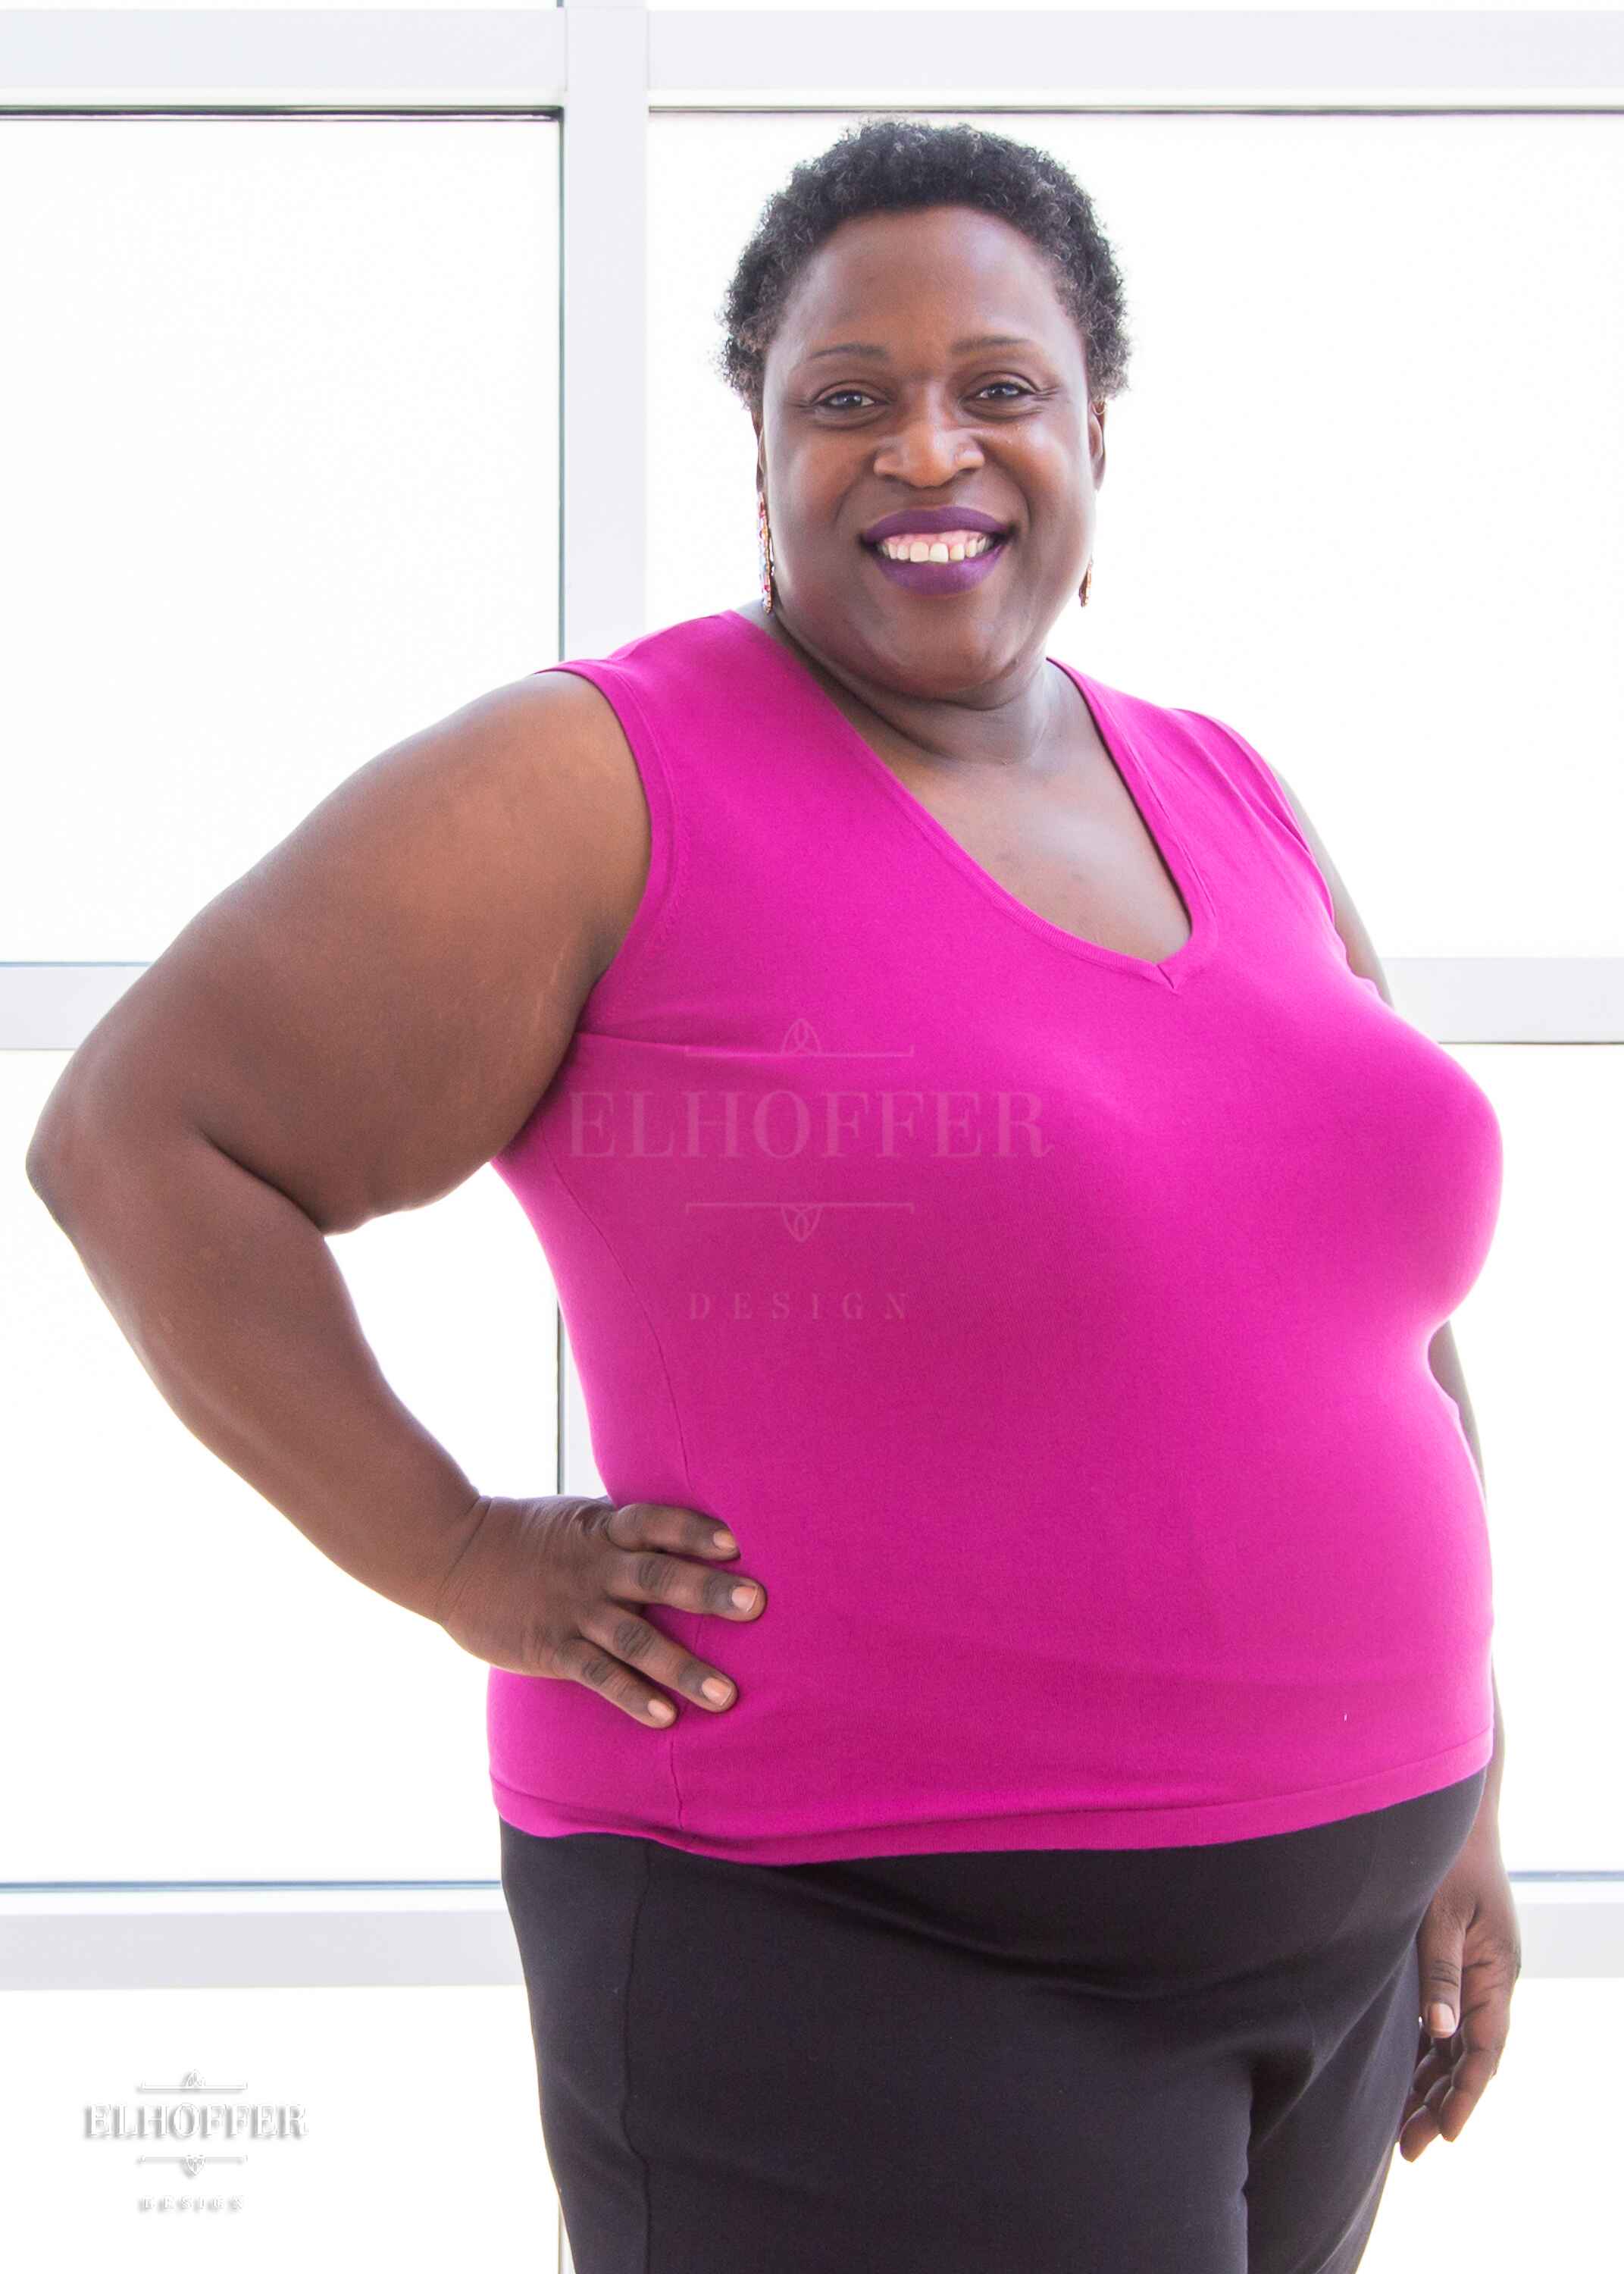 Adalgiza, a medium brown skinned 4xl model with short dark super curly hair, is smiling while wearing a bright pink lightweight knit v neck tank top. The tank top hits about mid hip in length.